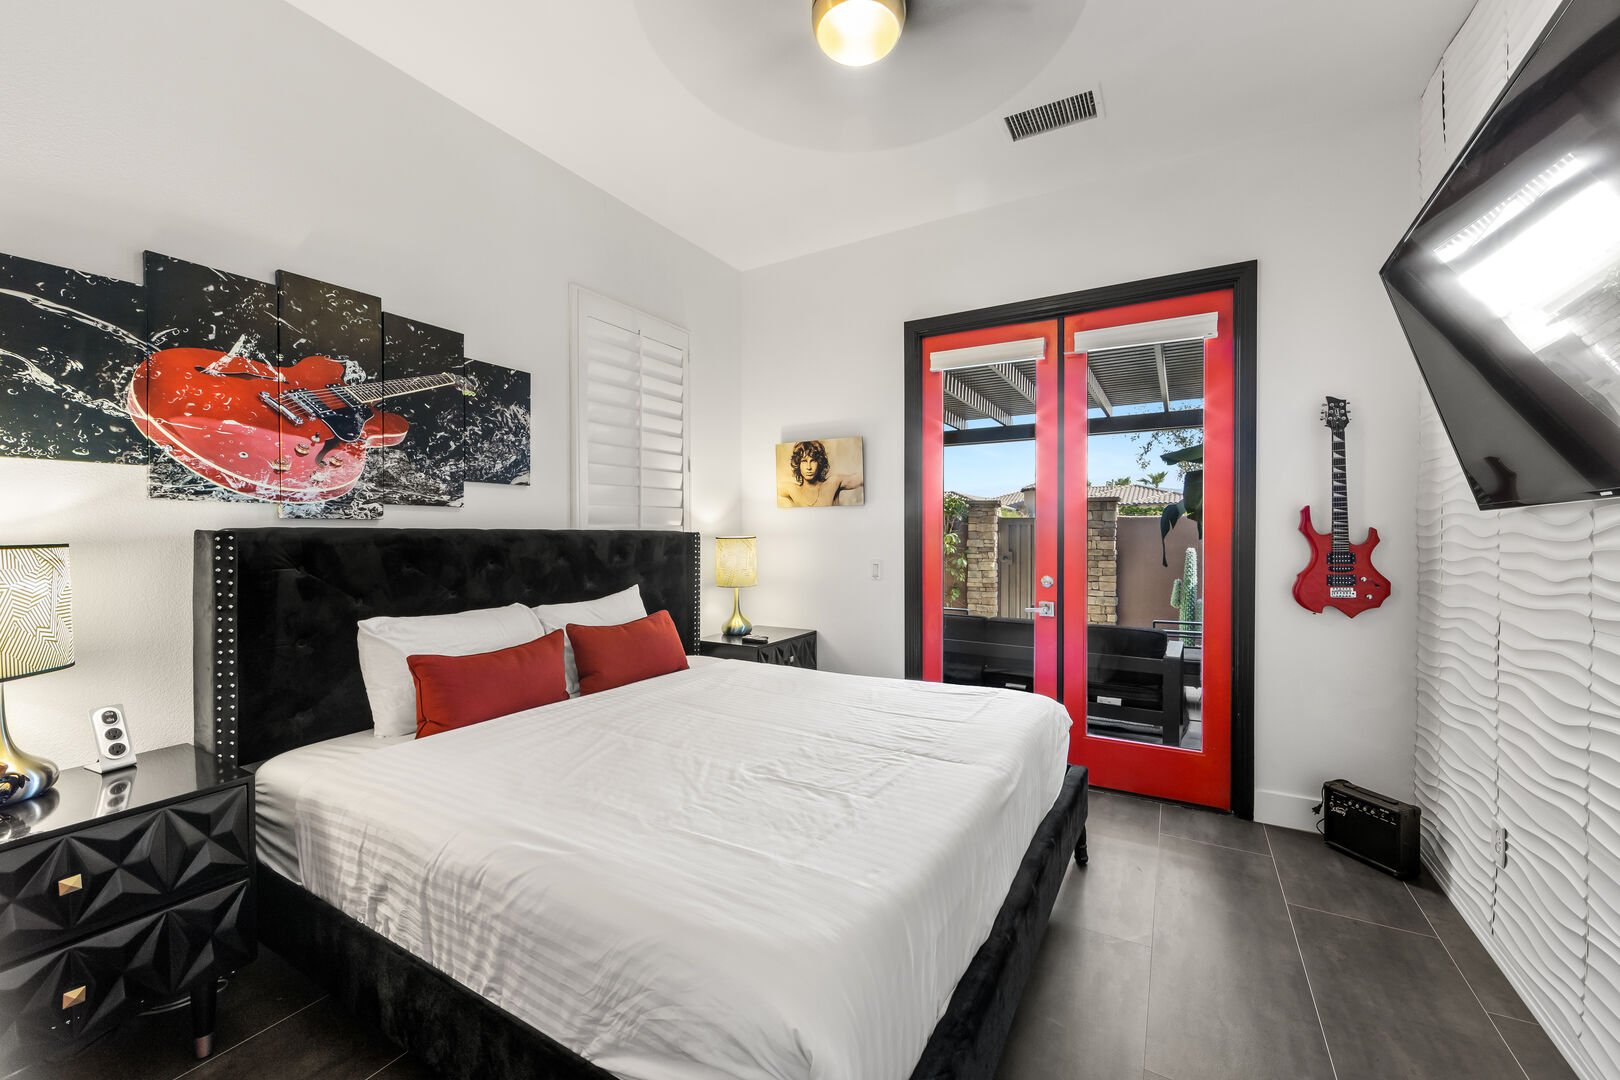 Bedroom 5 has a King-sized bed, a separate entry from the landscaped courtyard, & TV.